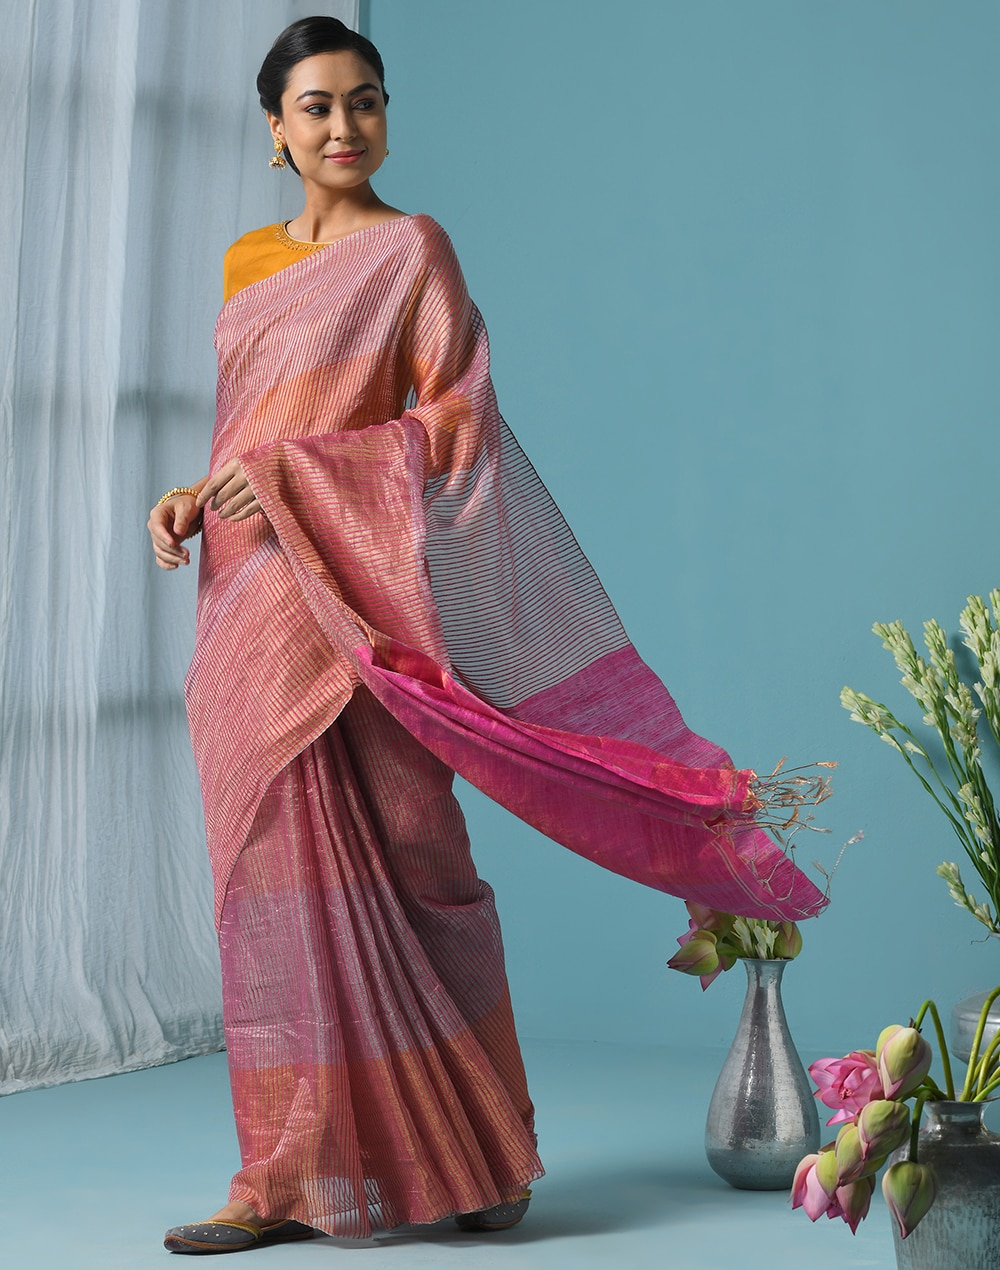 A Short Girl's Guide to Looking Great in a Saree - Your Sassy Guide